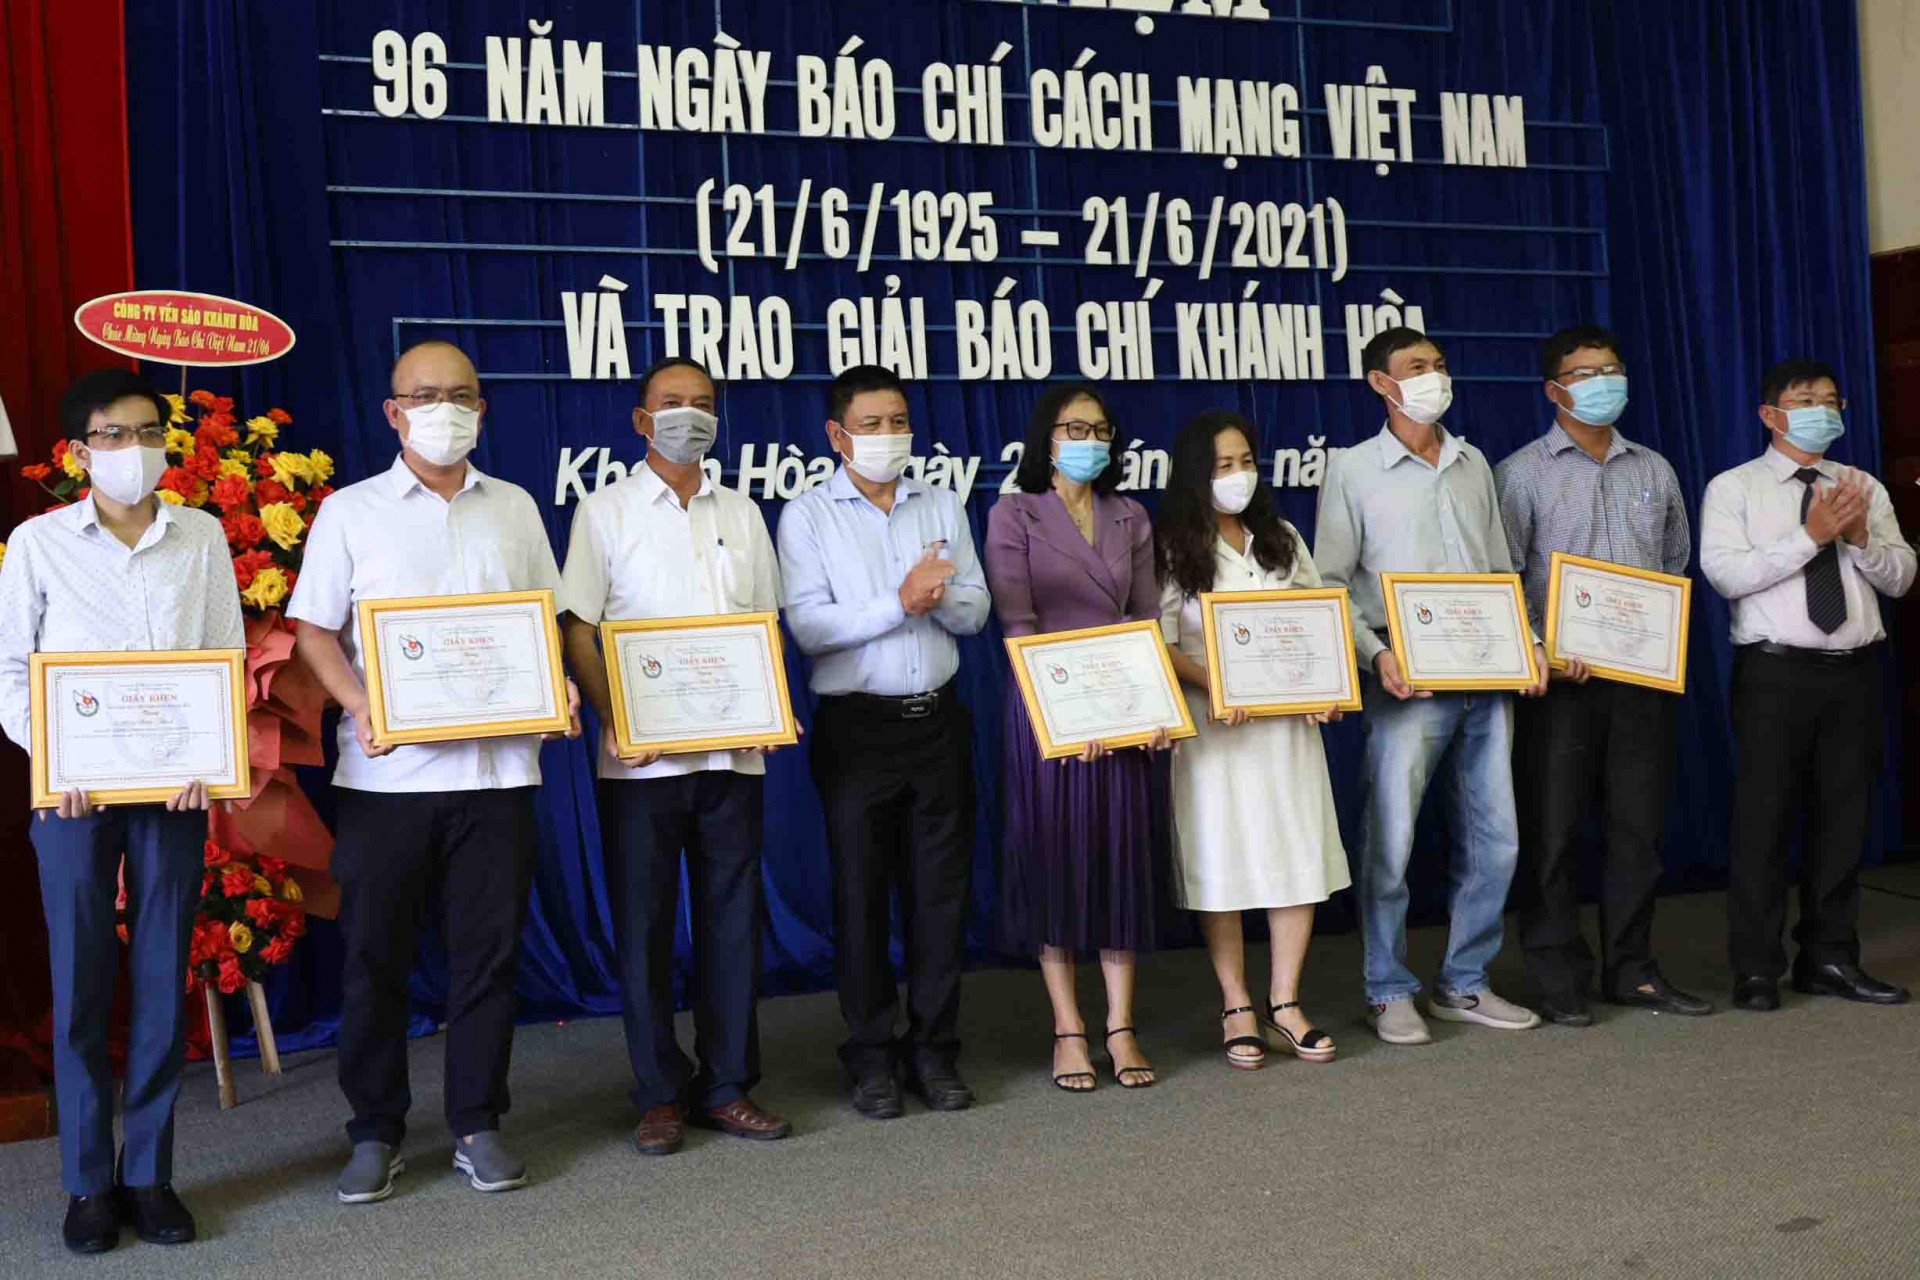 Leadership of Khanh Hoa Provincial Journalists’ Association offering certificates of merit to outstanding members